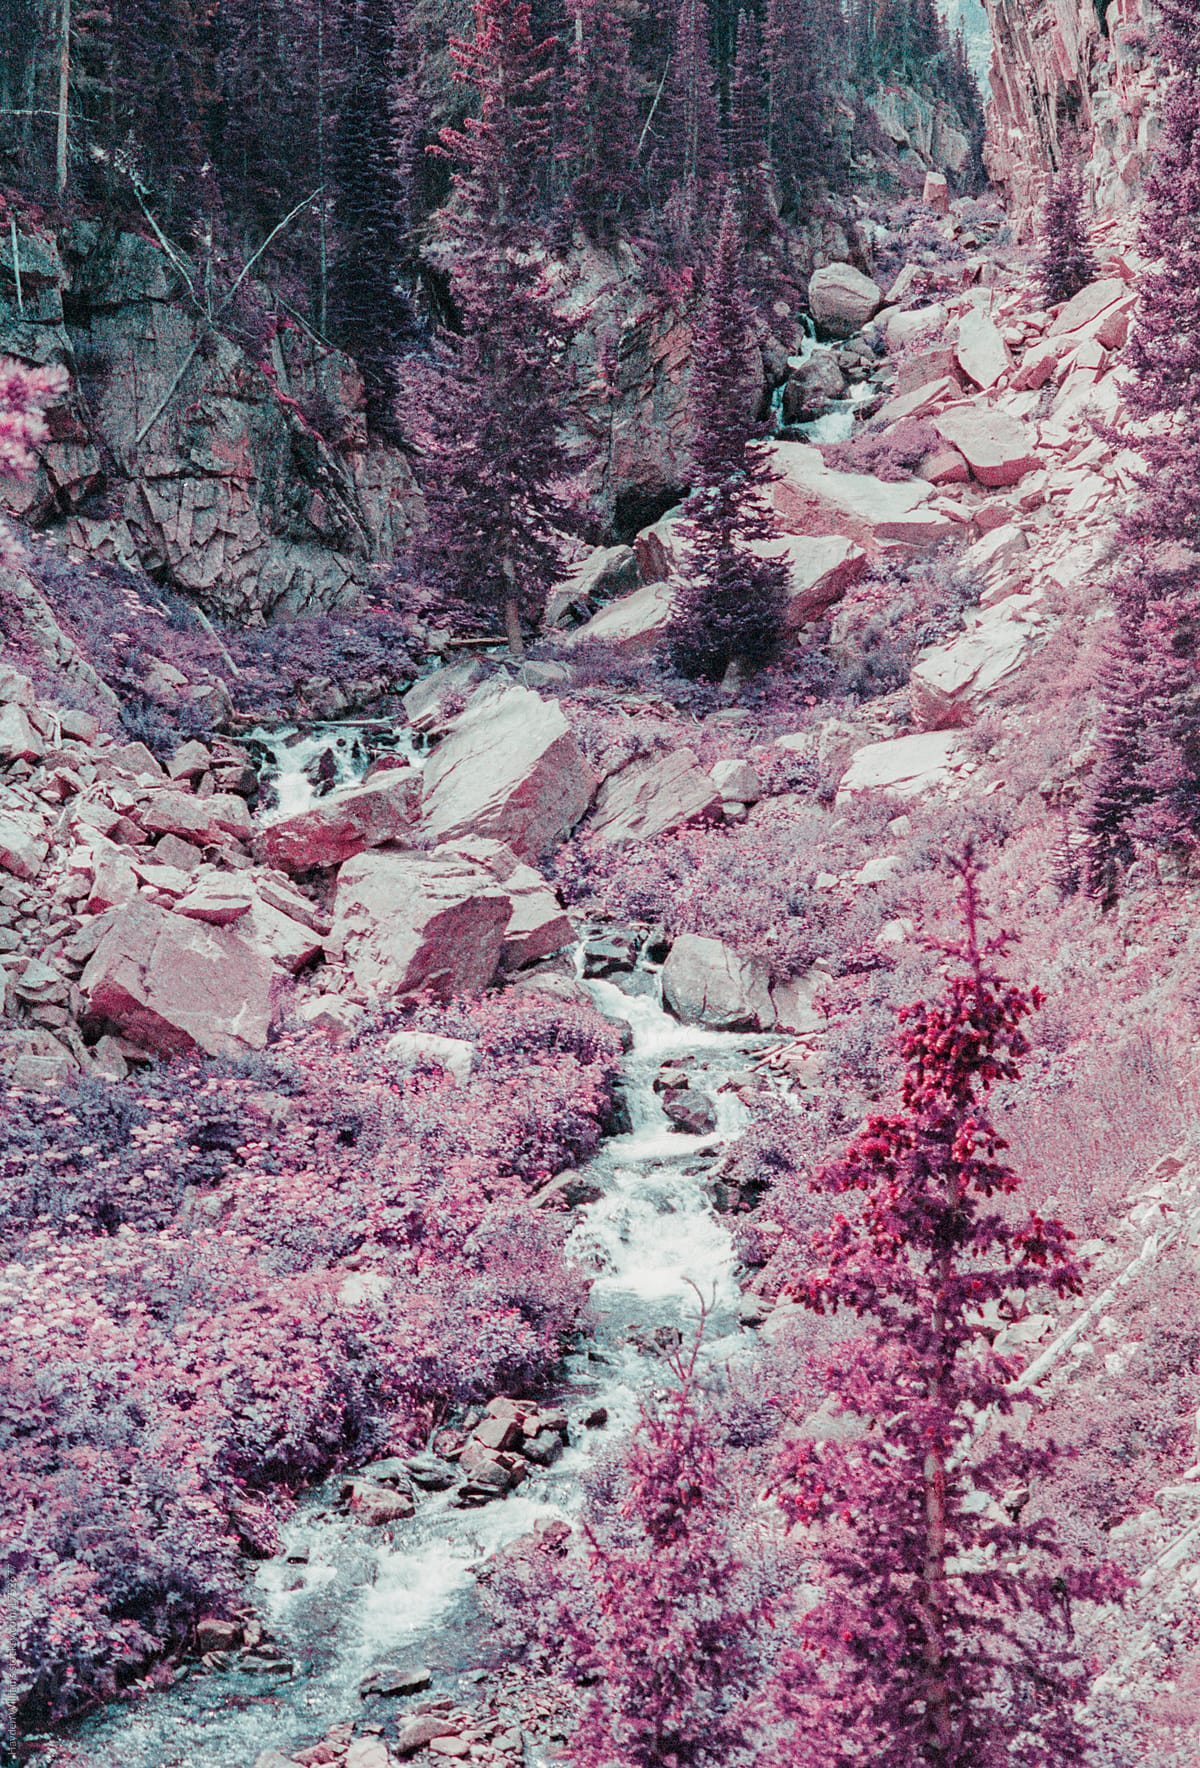 Small river flowing through a rocky landscape surrounded by purple pine trees